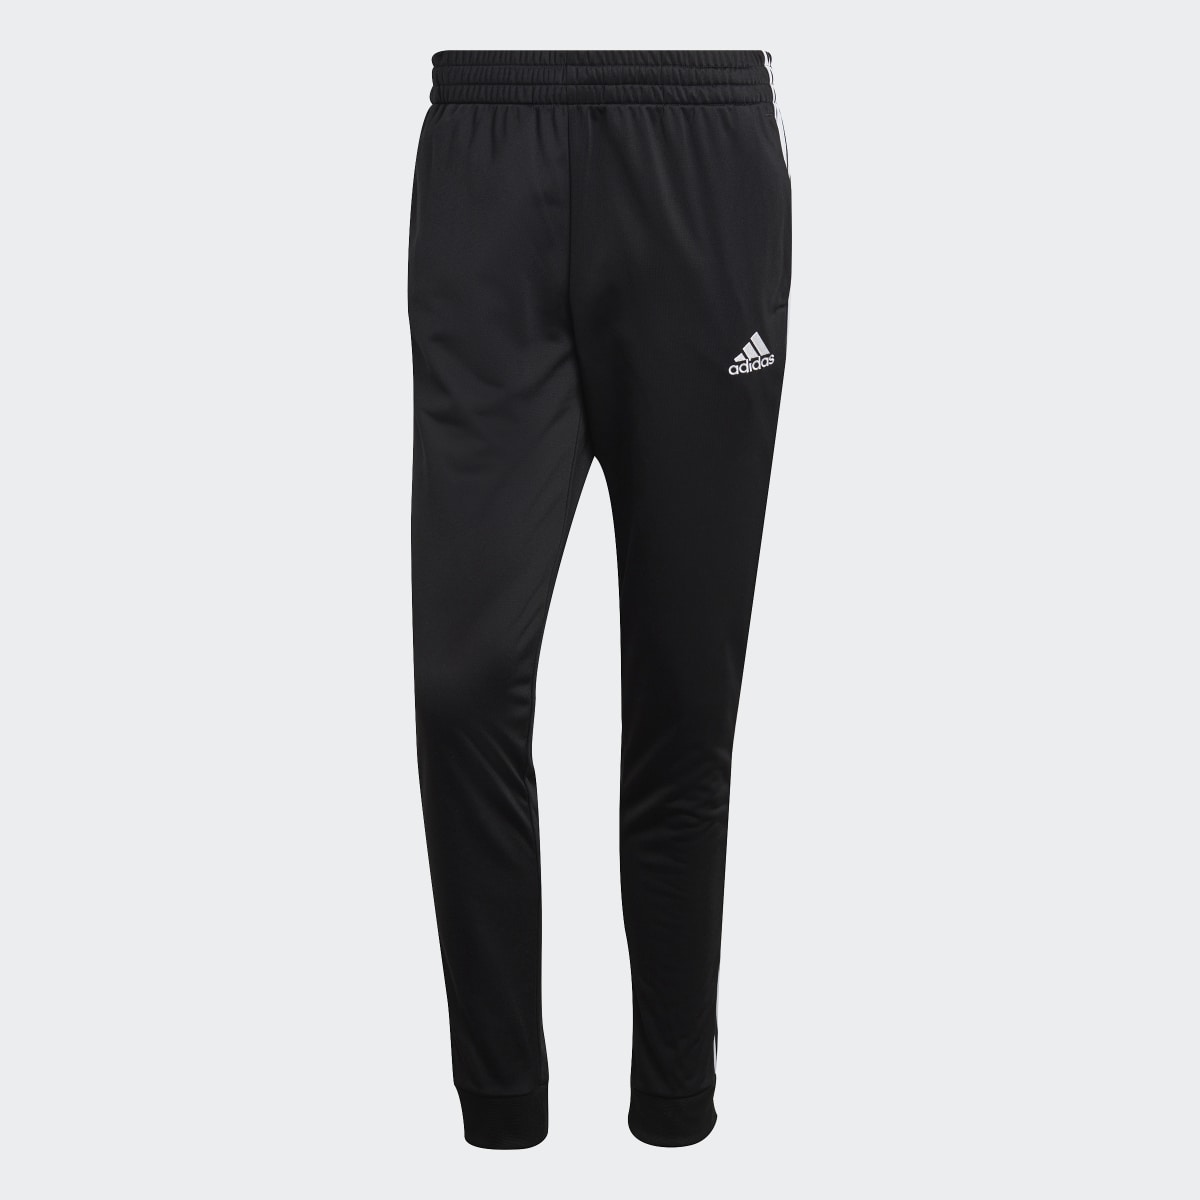 Adidas Basic 3-Stripes Tricot Track Suit. 9